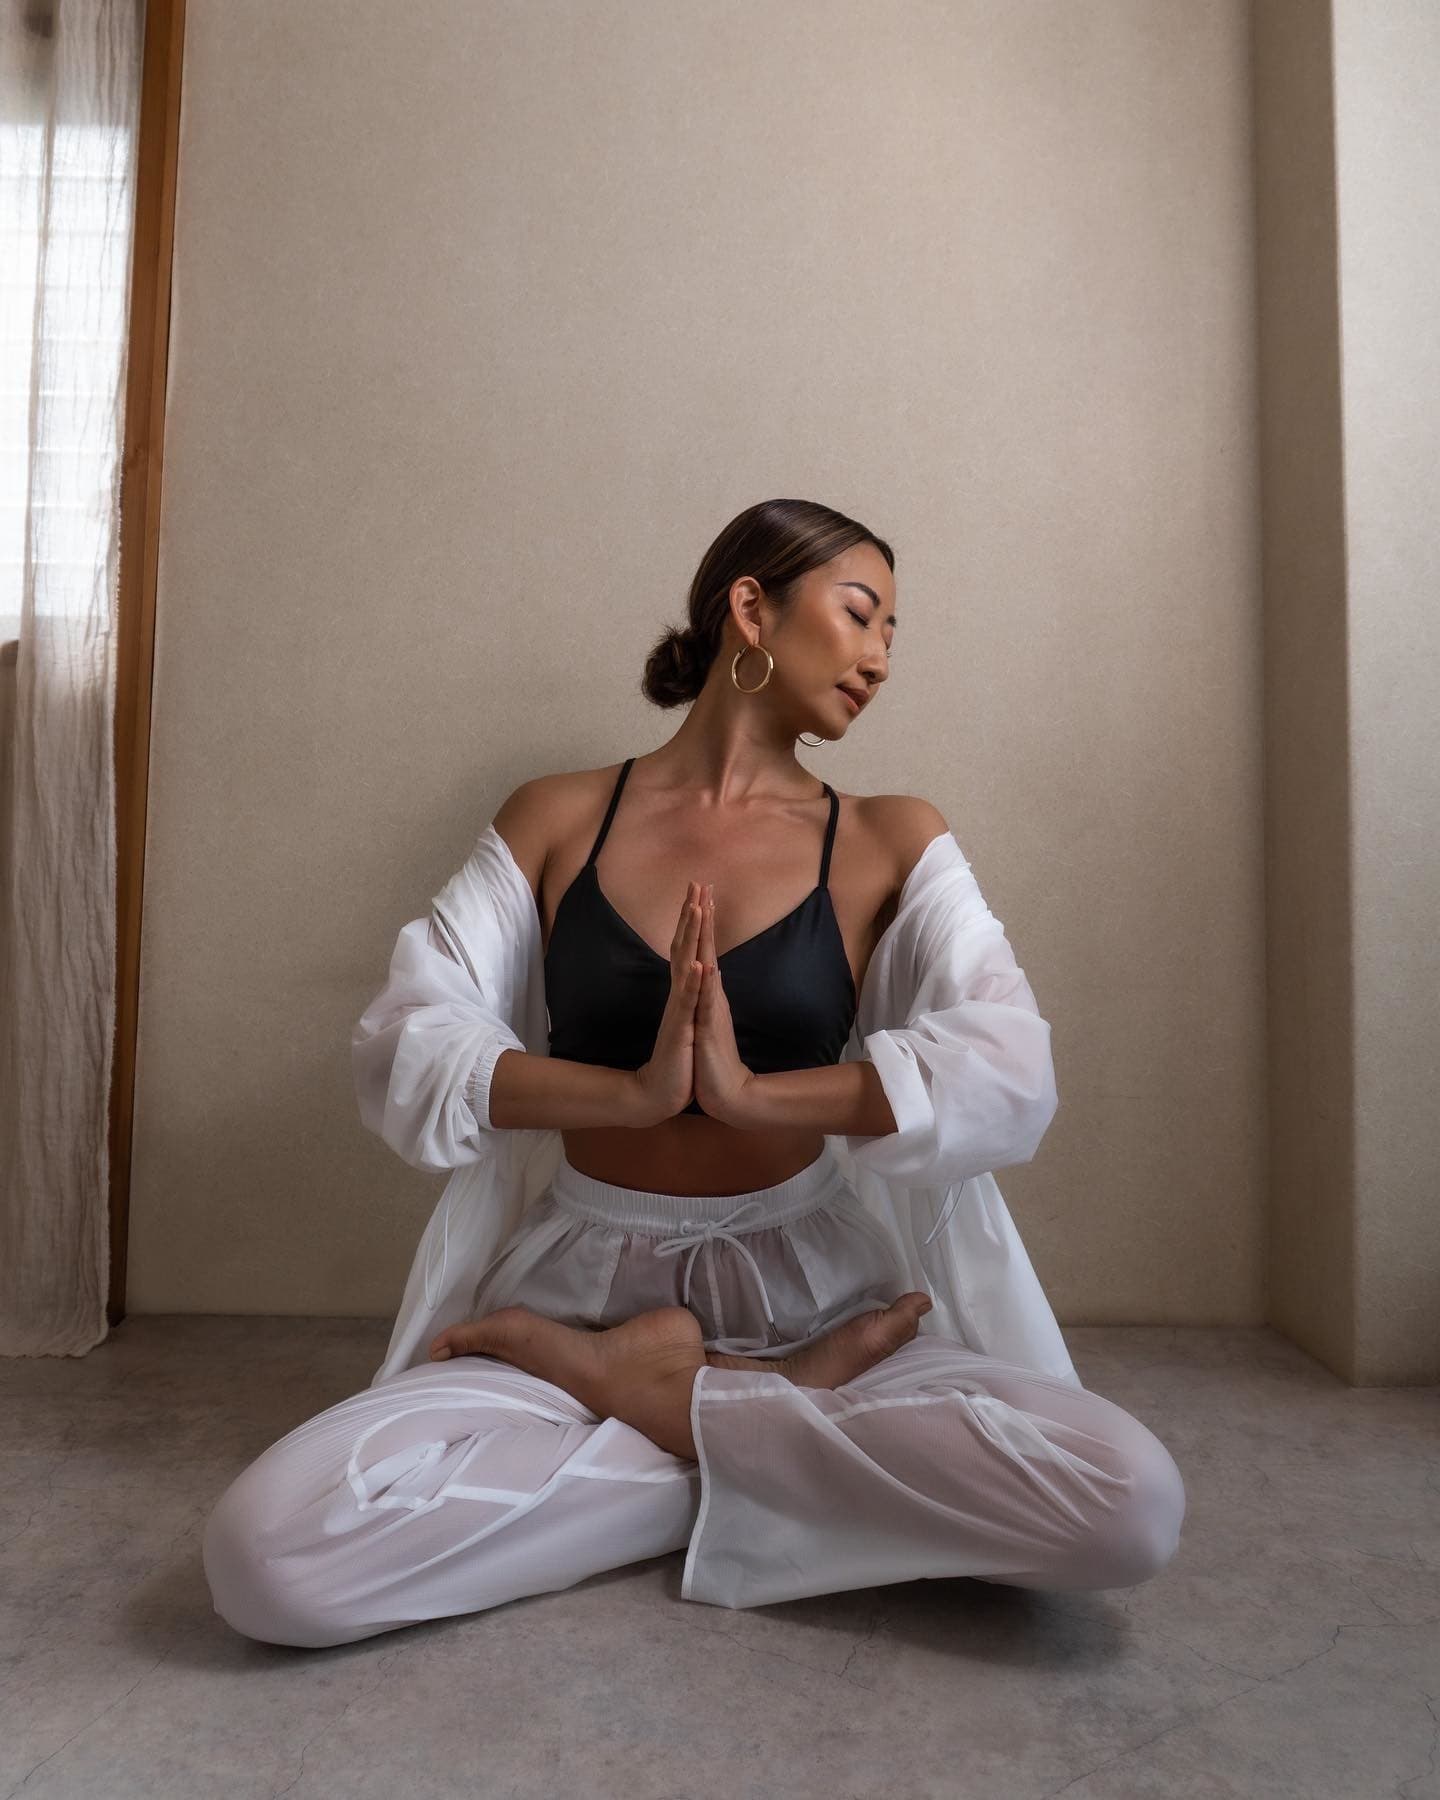 @yogibeachhouse wearing a Delight Bralette with a Cloud Nine Jacket and Cloud Nine Pant in white while in Anjali Mudra pose in front of a cream-colored wall.  